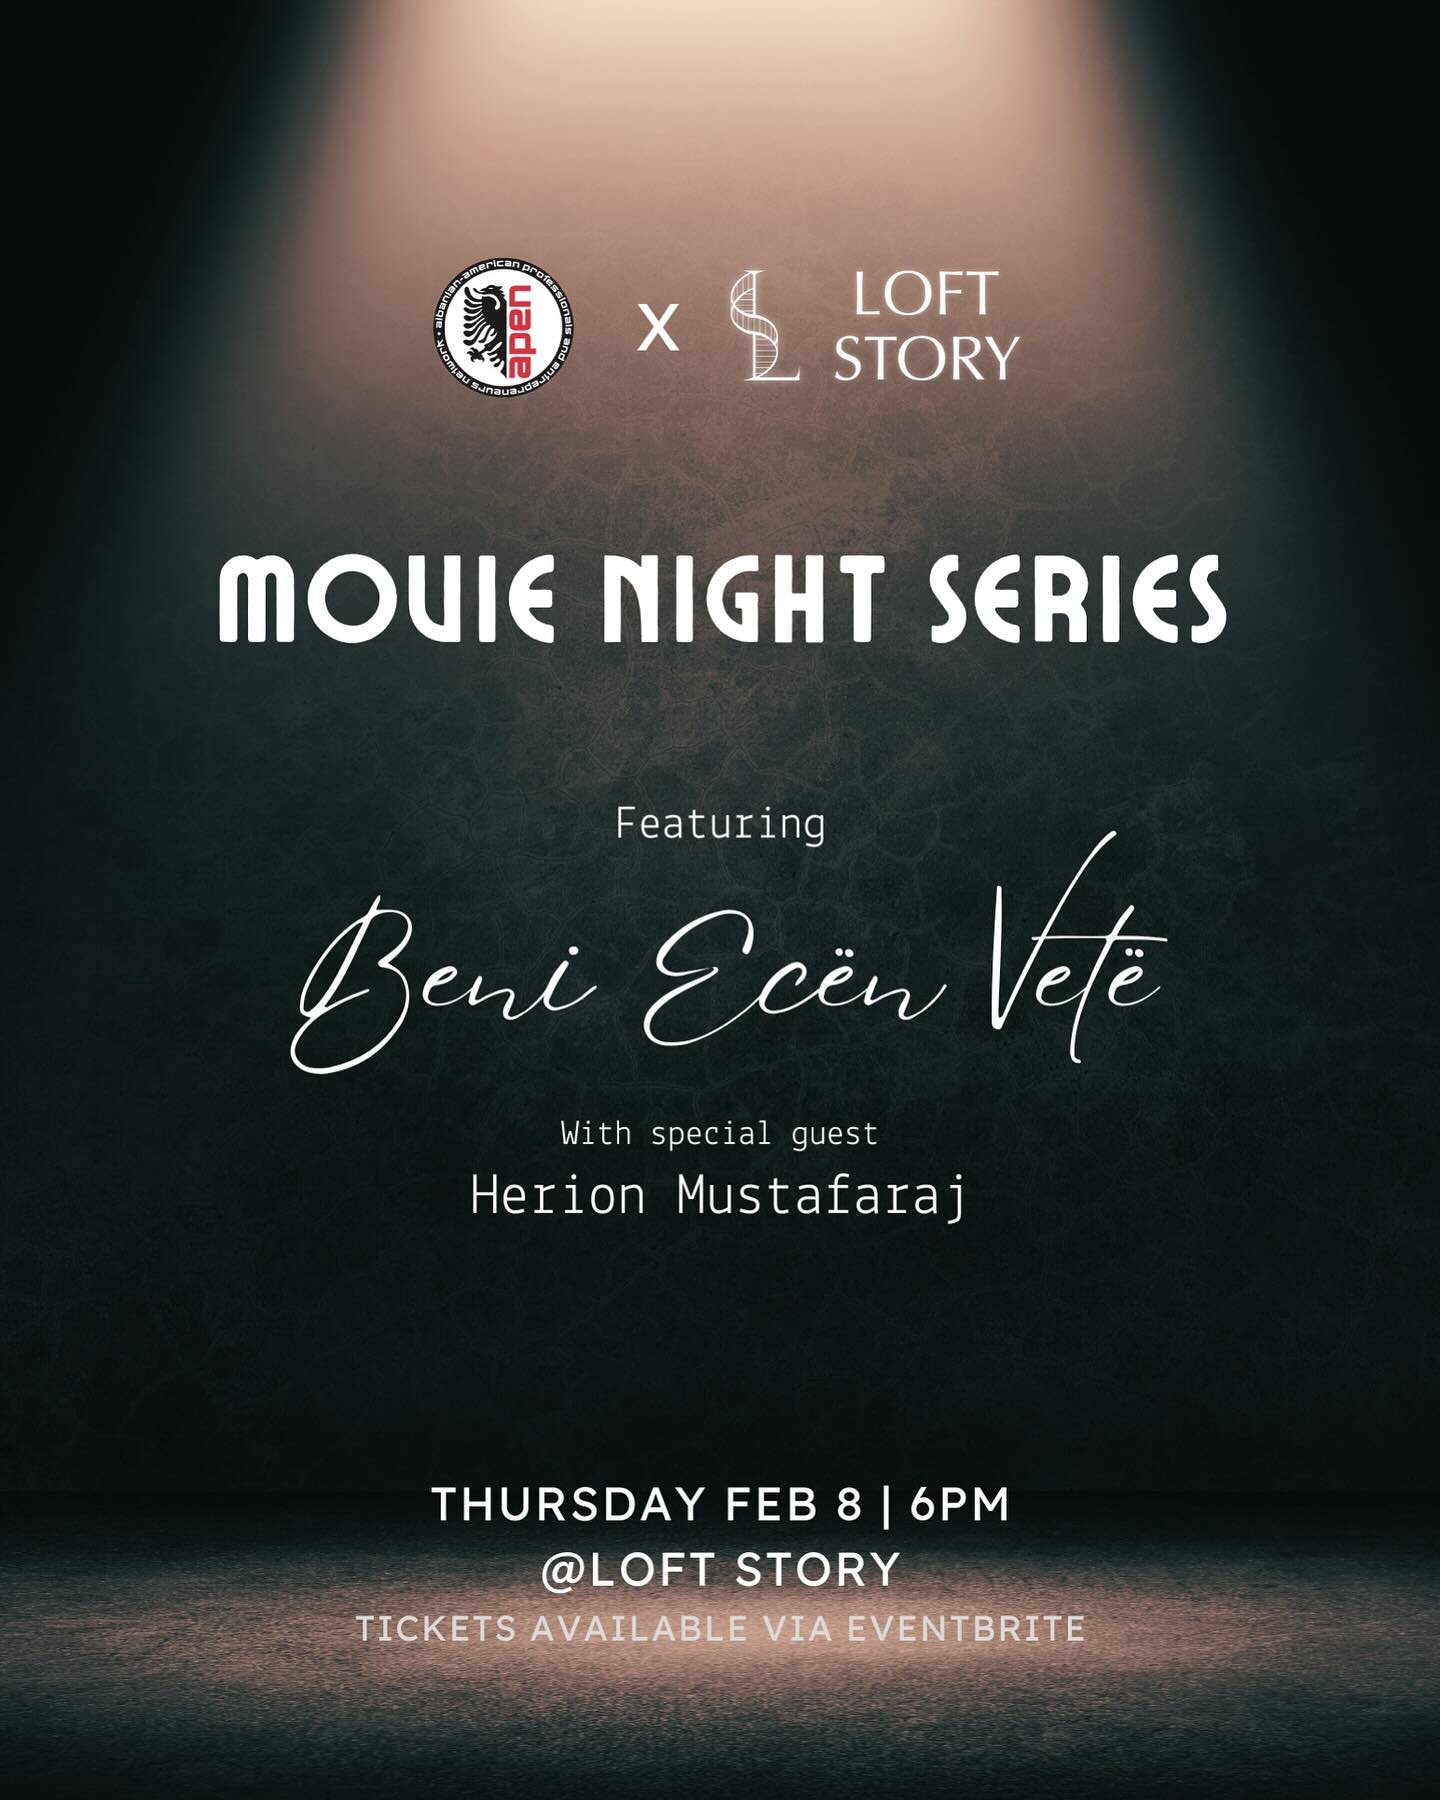 Our first event of the year is an extra special one. Please join us for our first movie night in partnership with LOFT STORY, an Albanian-owned business and curated event space.

🎟️ Ticket link in bio